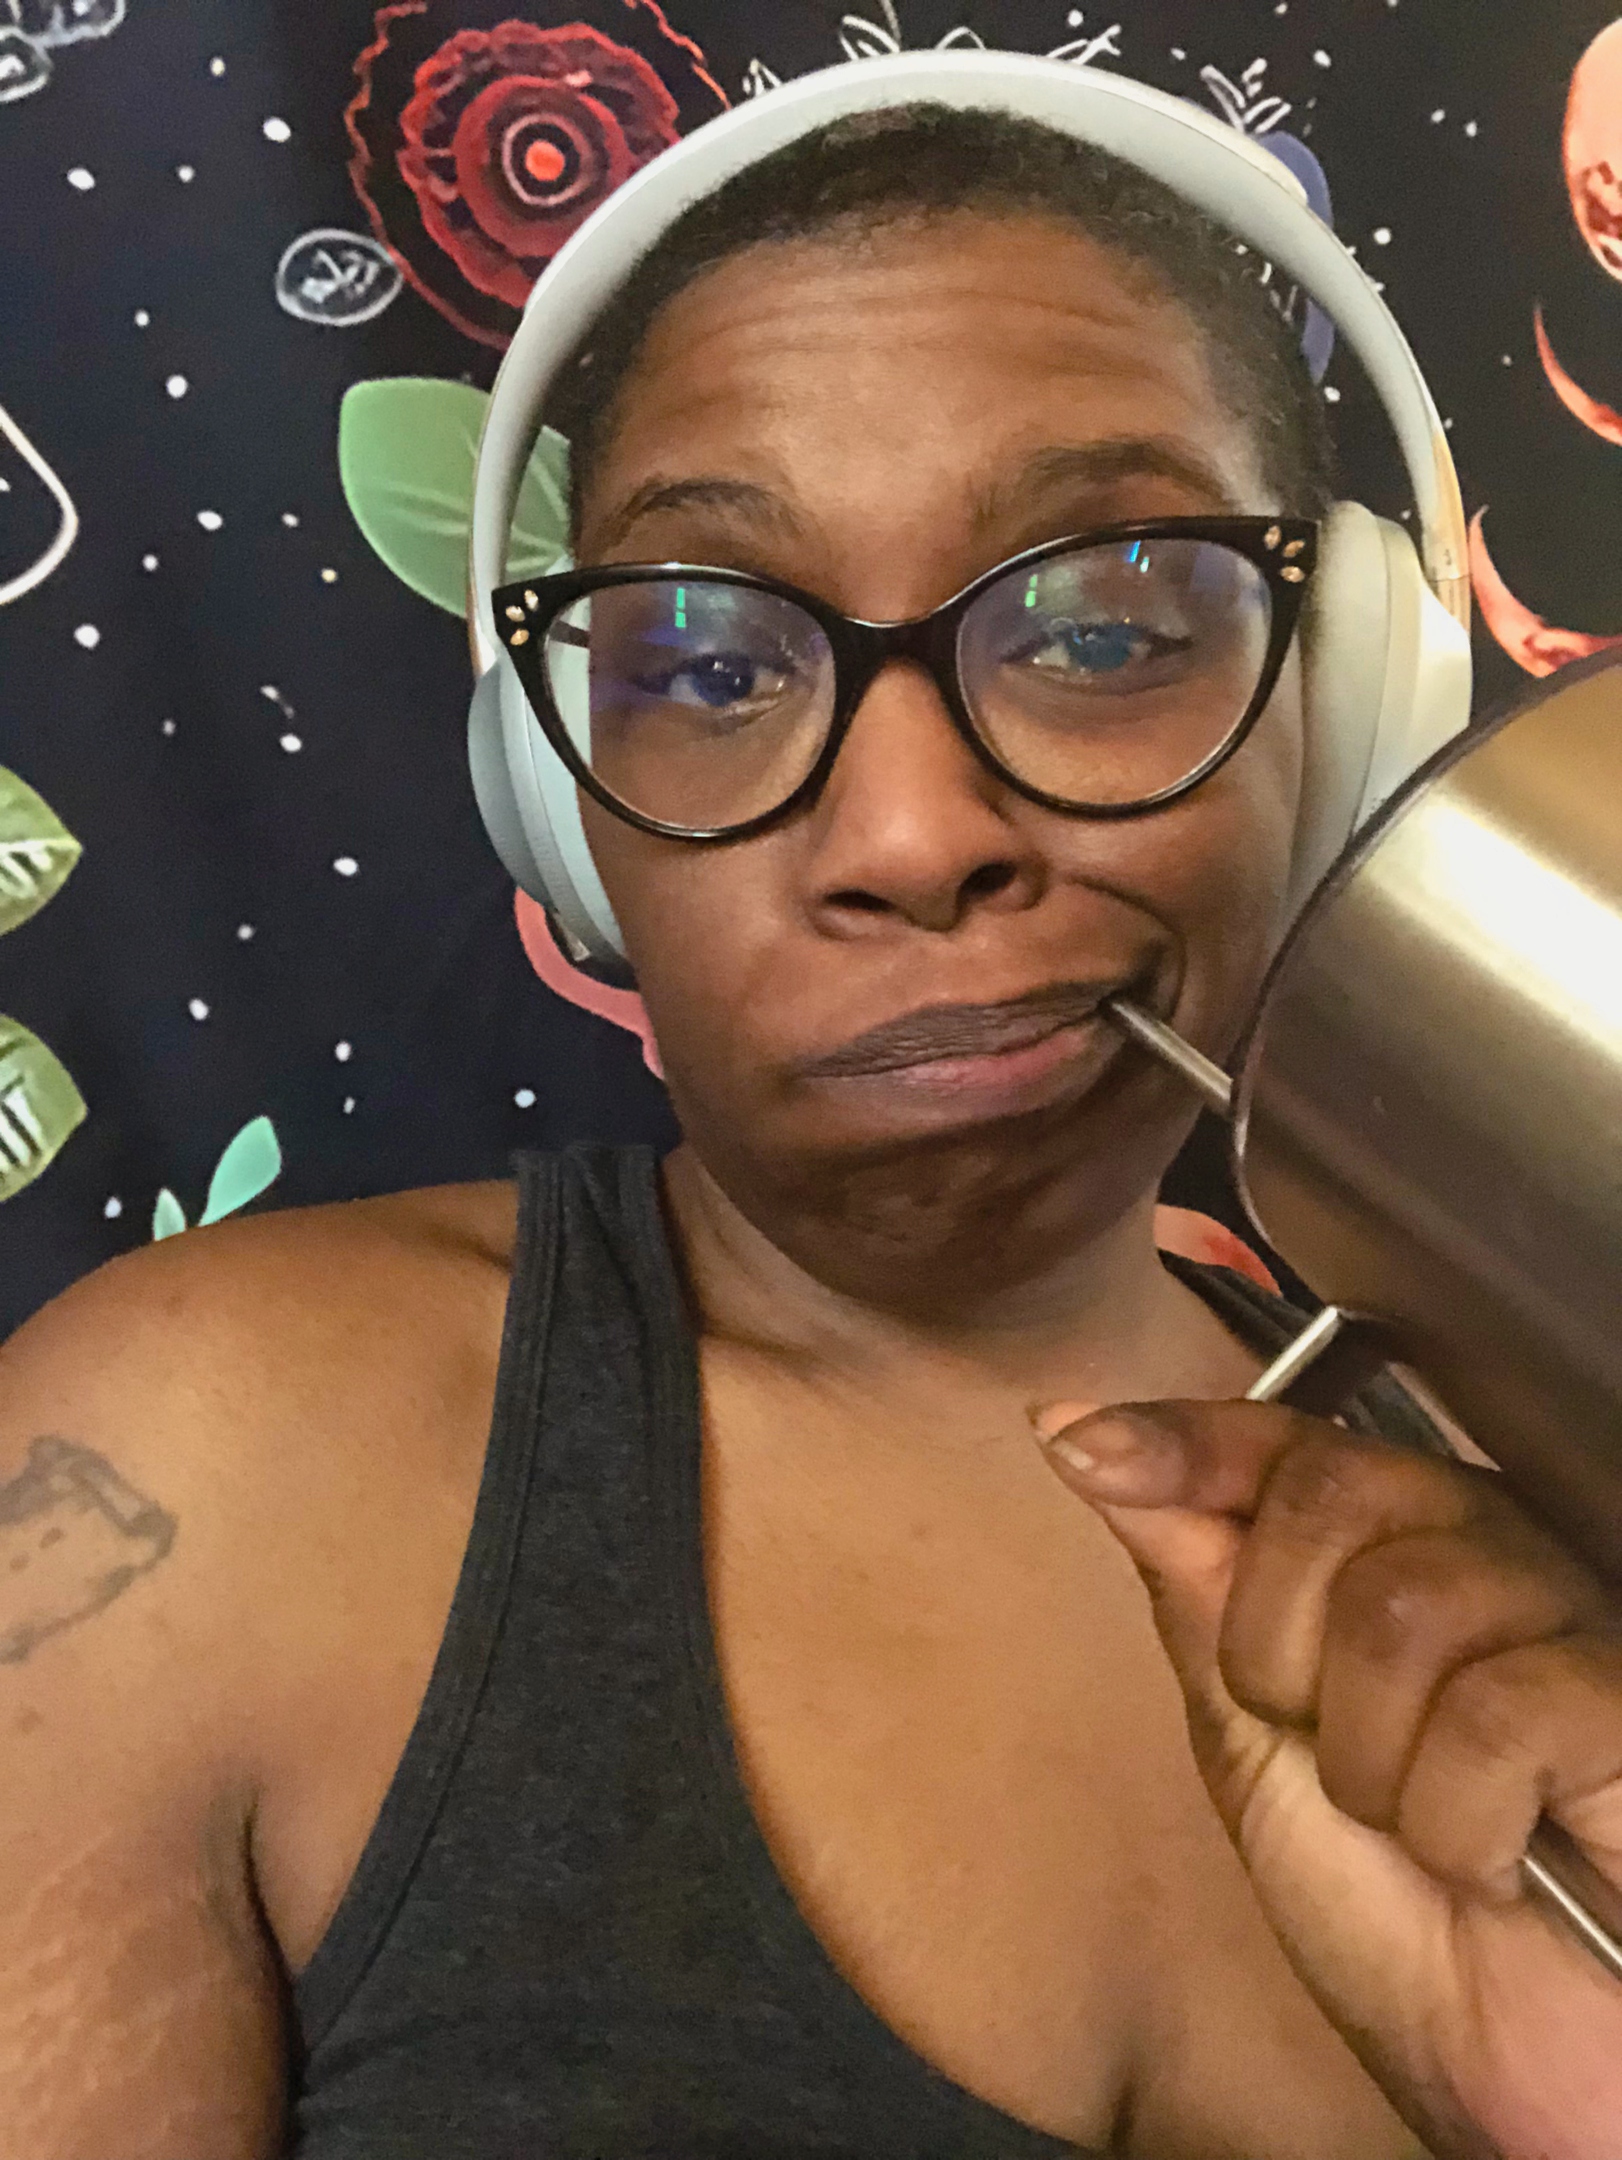 Sasha, a dark skinned person wearing a deep gray tank top, drinks water from a stainless steel tumbler.